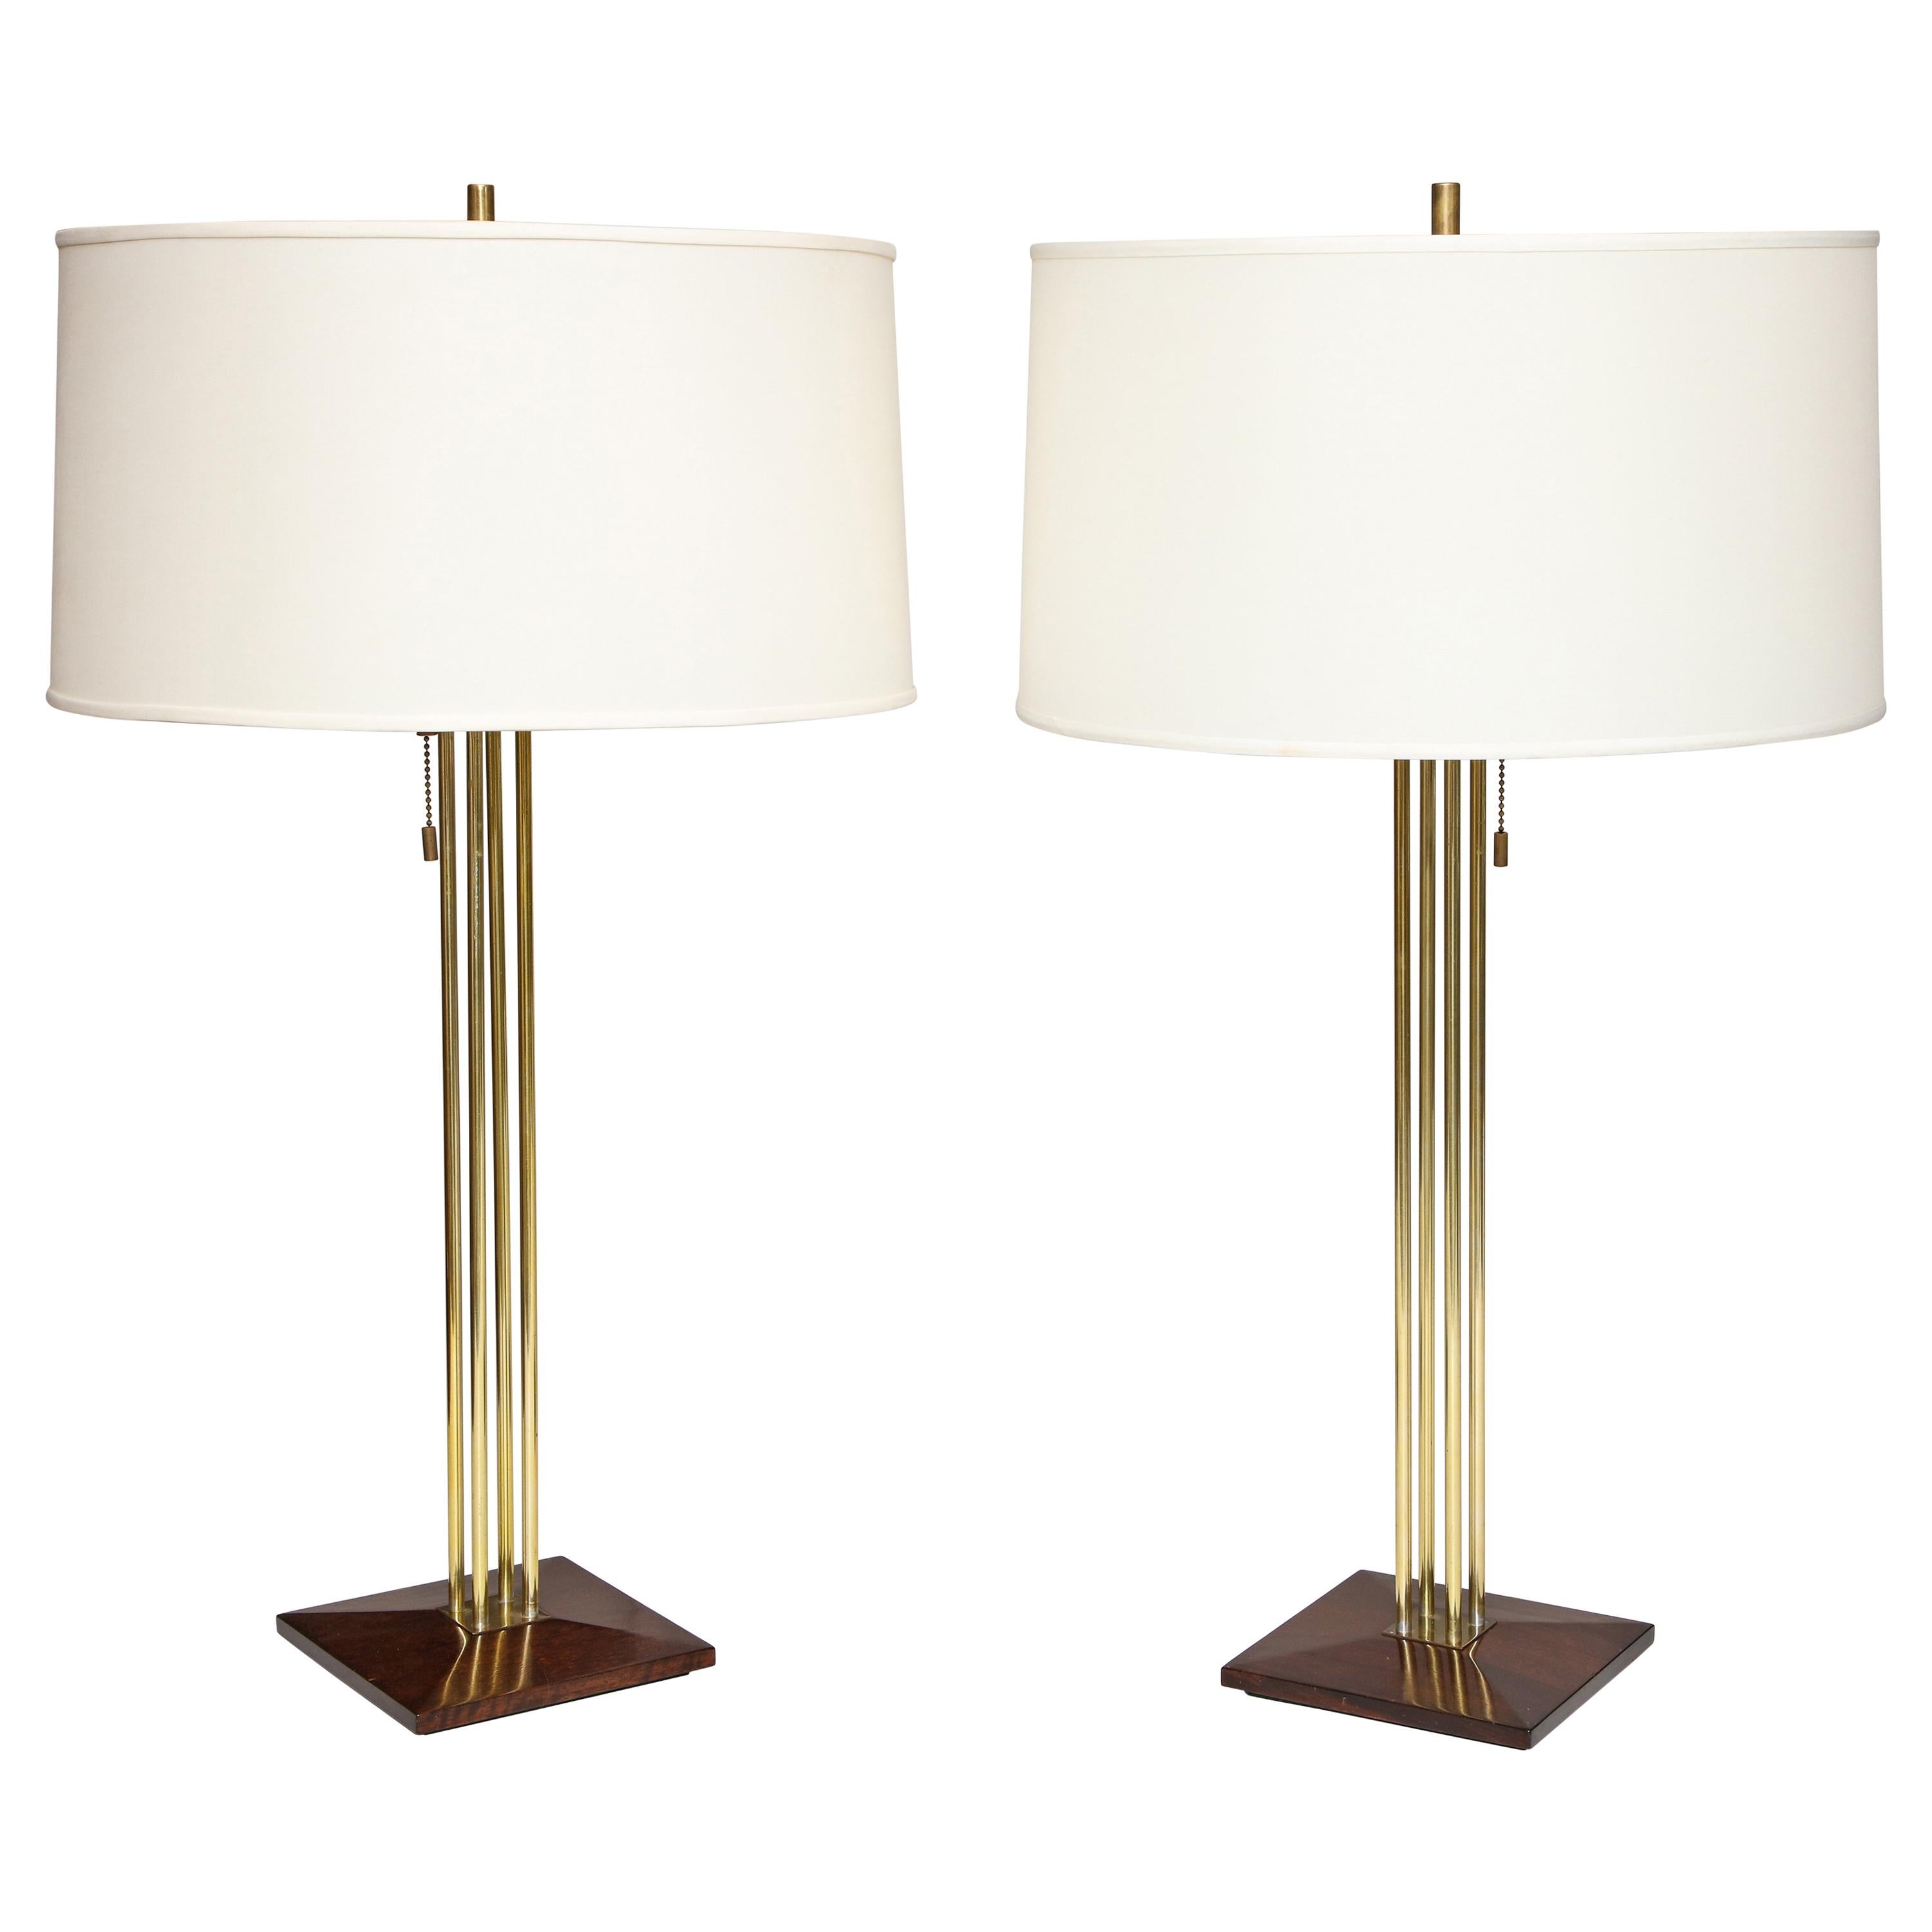 Pair of Modernist Table Lamps